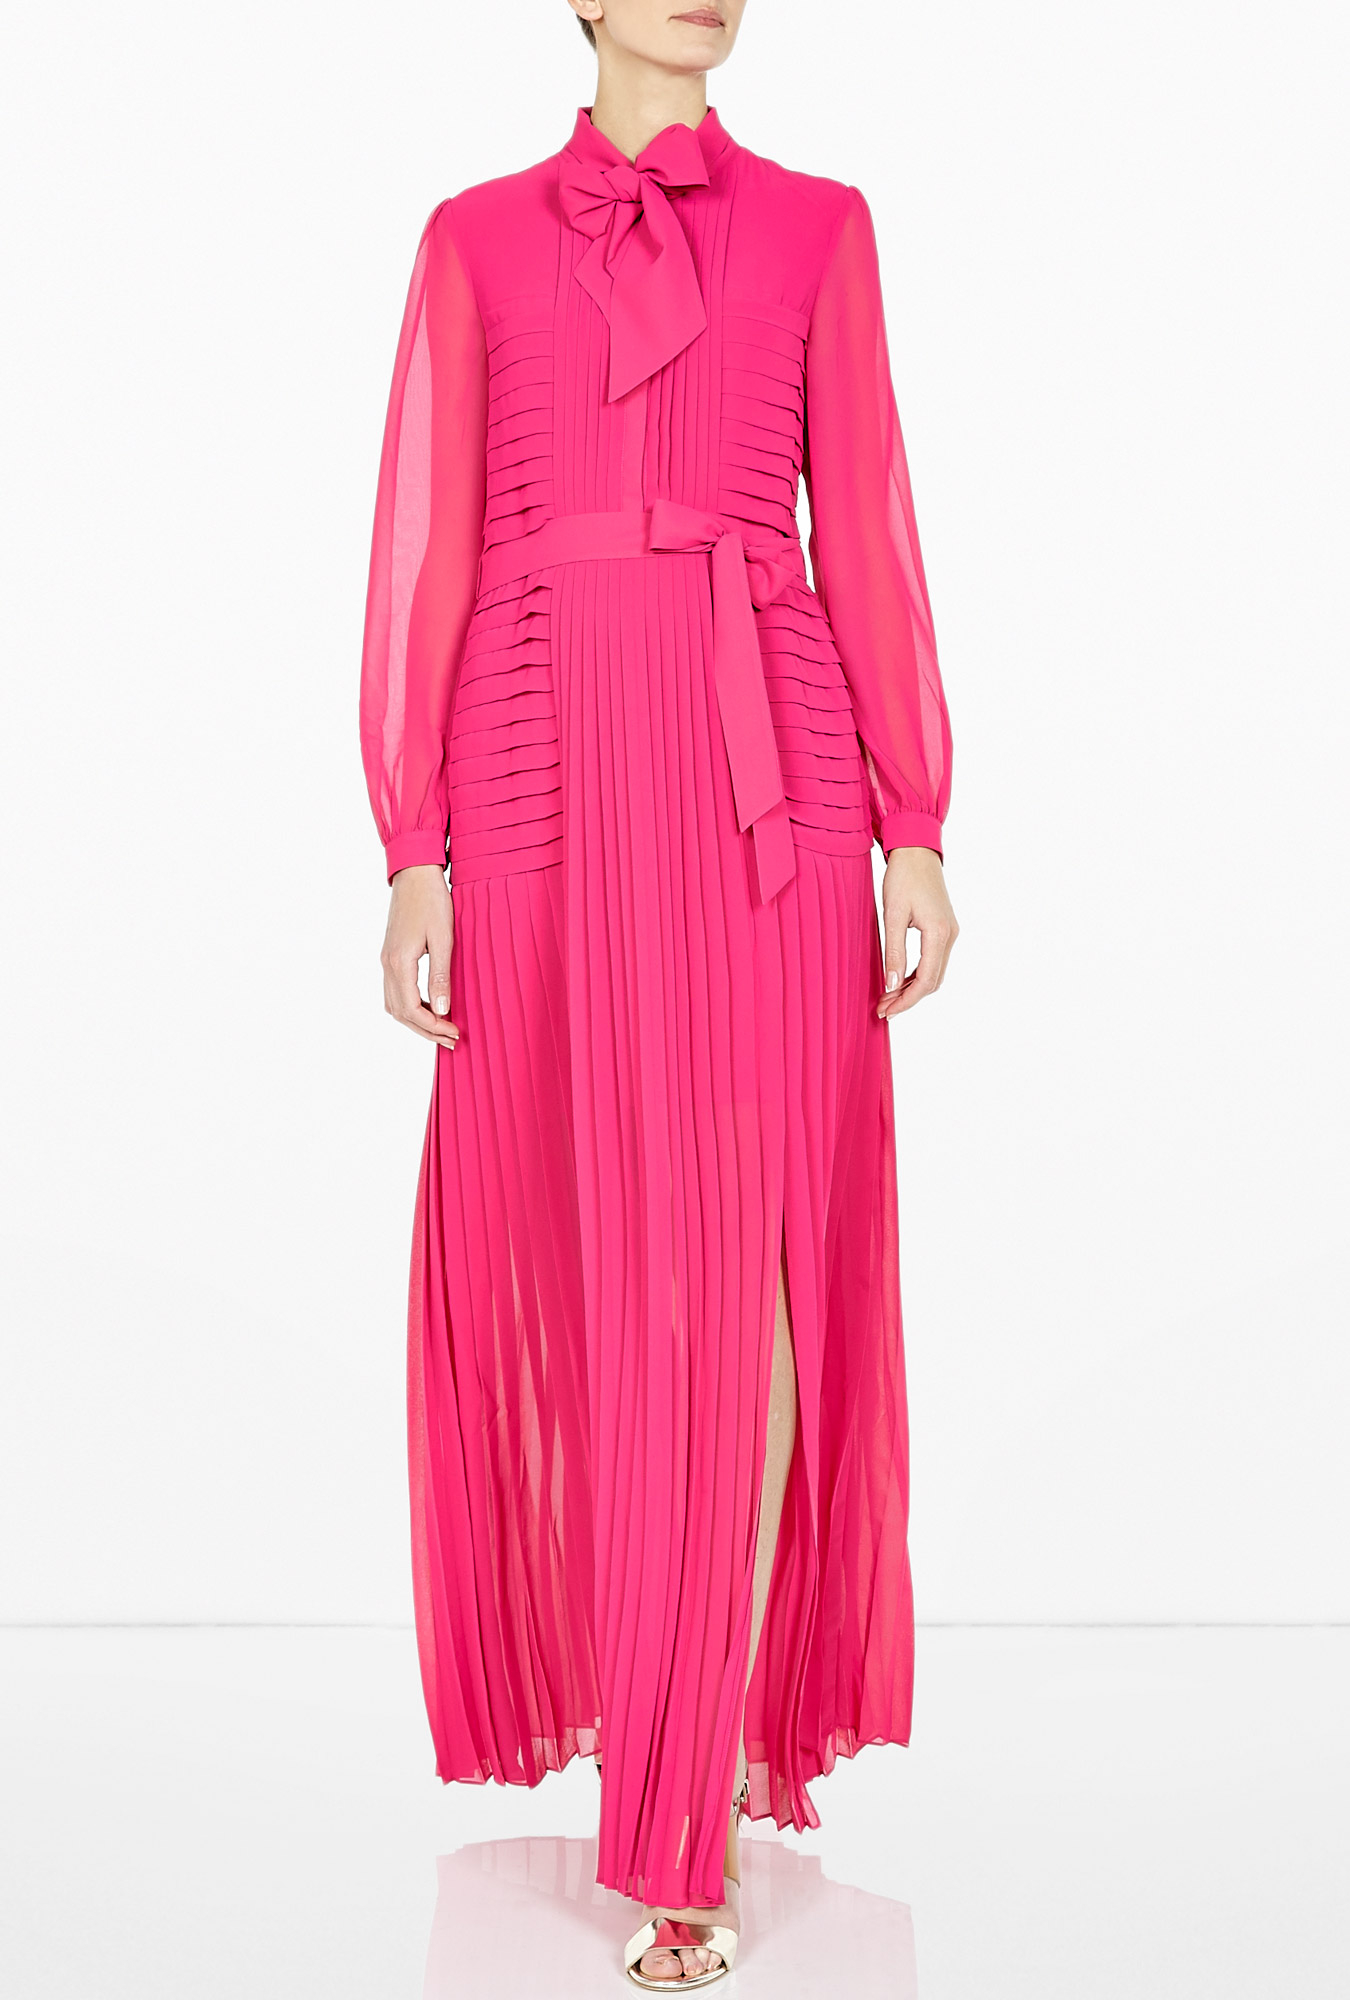 Alice By Temperley Long Rose Pleated Dress in Pink (fuchsia) | Lyst